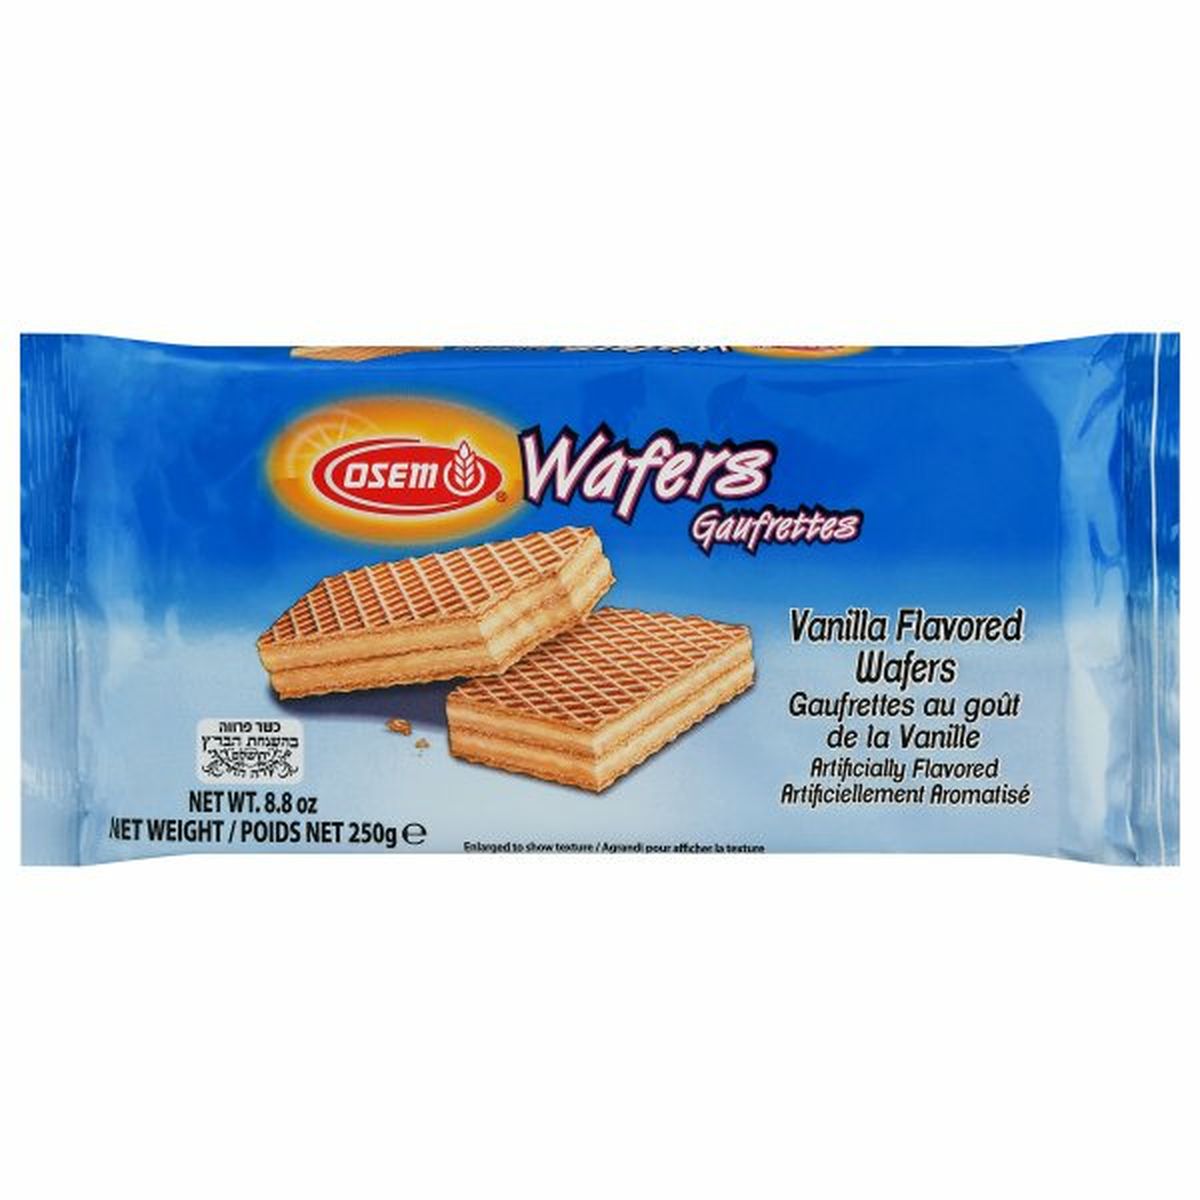 Calories in Osem Wafers, Vanilla Flavored